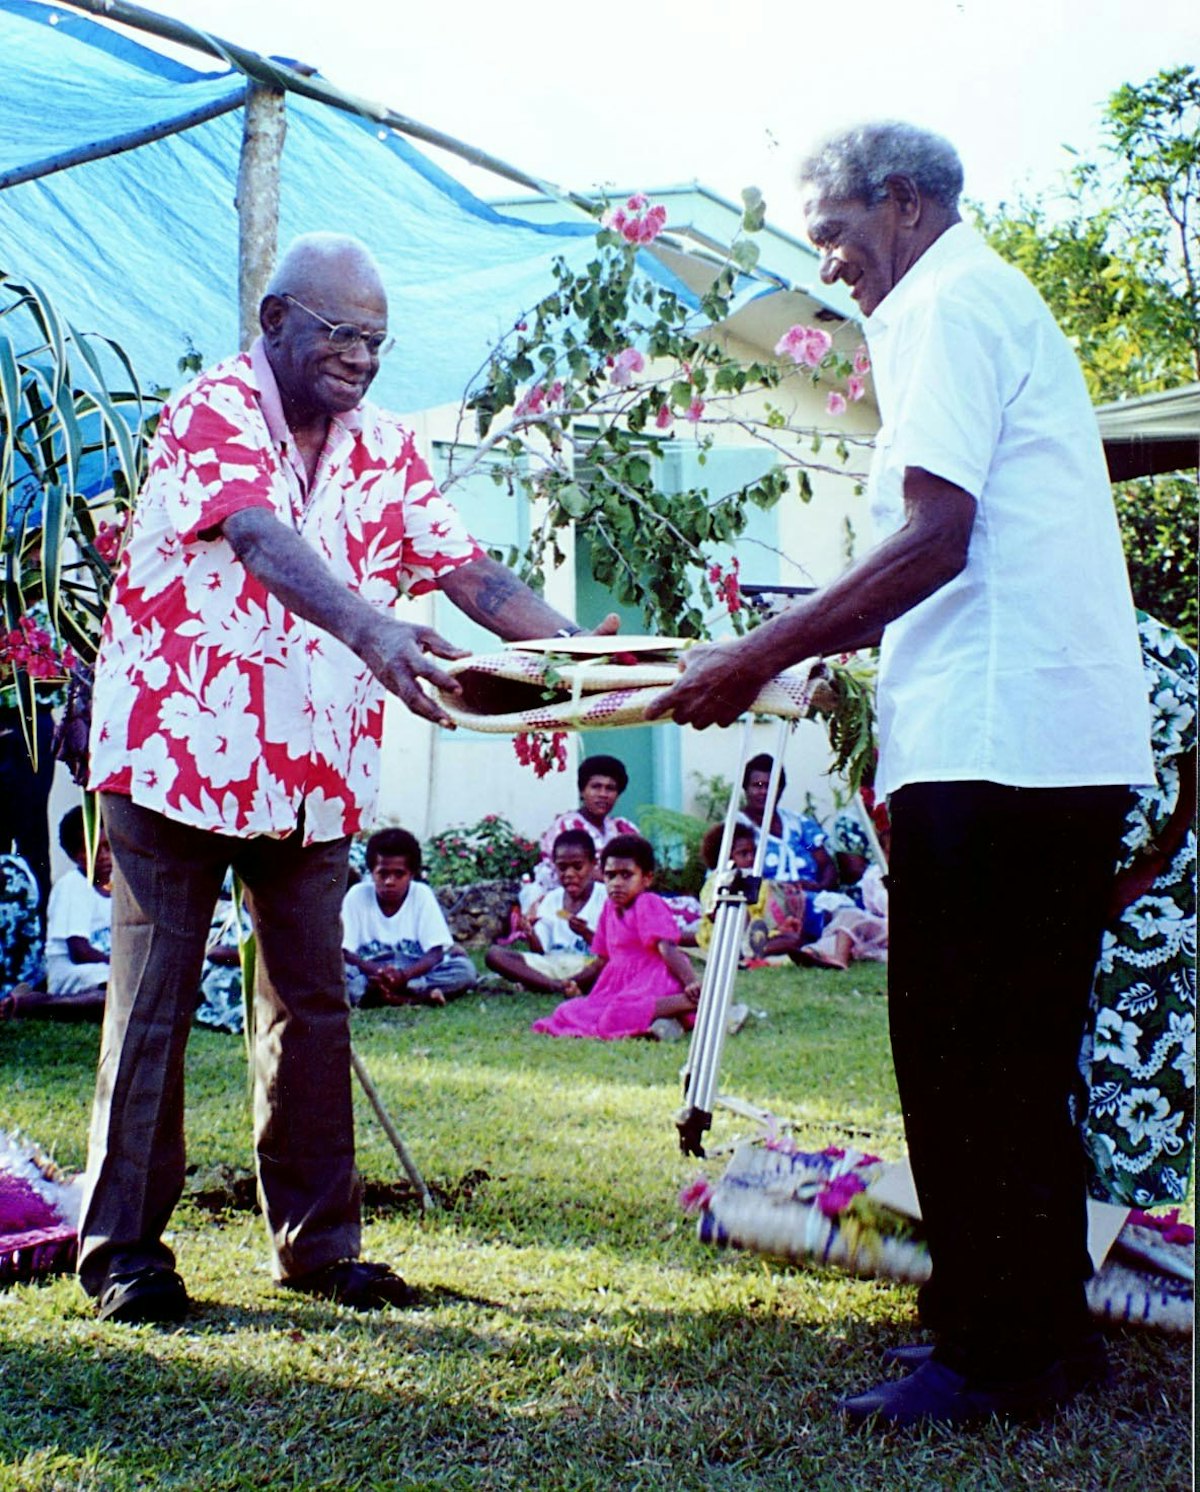 Chief Peter Poilapa receives a Bertha Dobbins Award for his contributions to a culture of peace at the grassroots level.| The award is presented by Peter Kaltoli on behalf of the Baha'is of Vanuatu at the fifth annual celebration of Bertha Dobbins Day, Port Vila, Vanuatu.